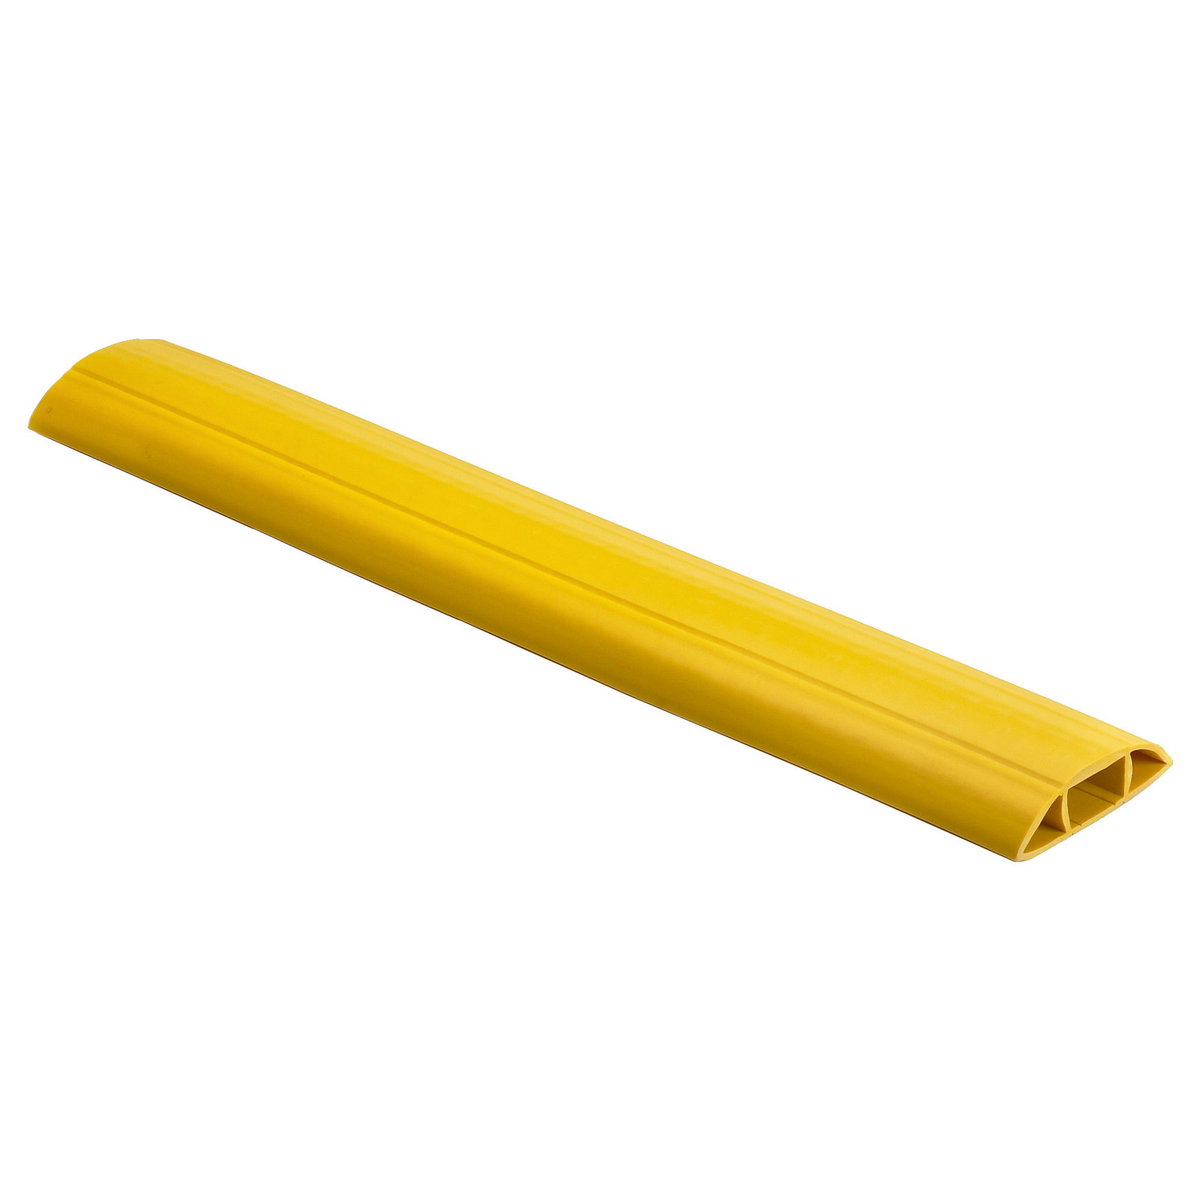 HUBBELL FT10Y3 FloorTrak® Cable Cover 1 Channels 3 ft L x 5.6 in W x 1.7 in  H PVC Yellow